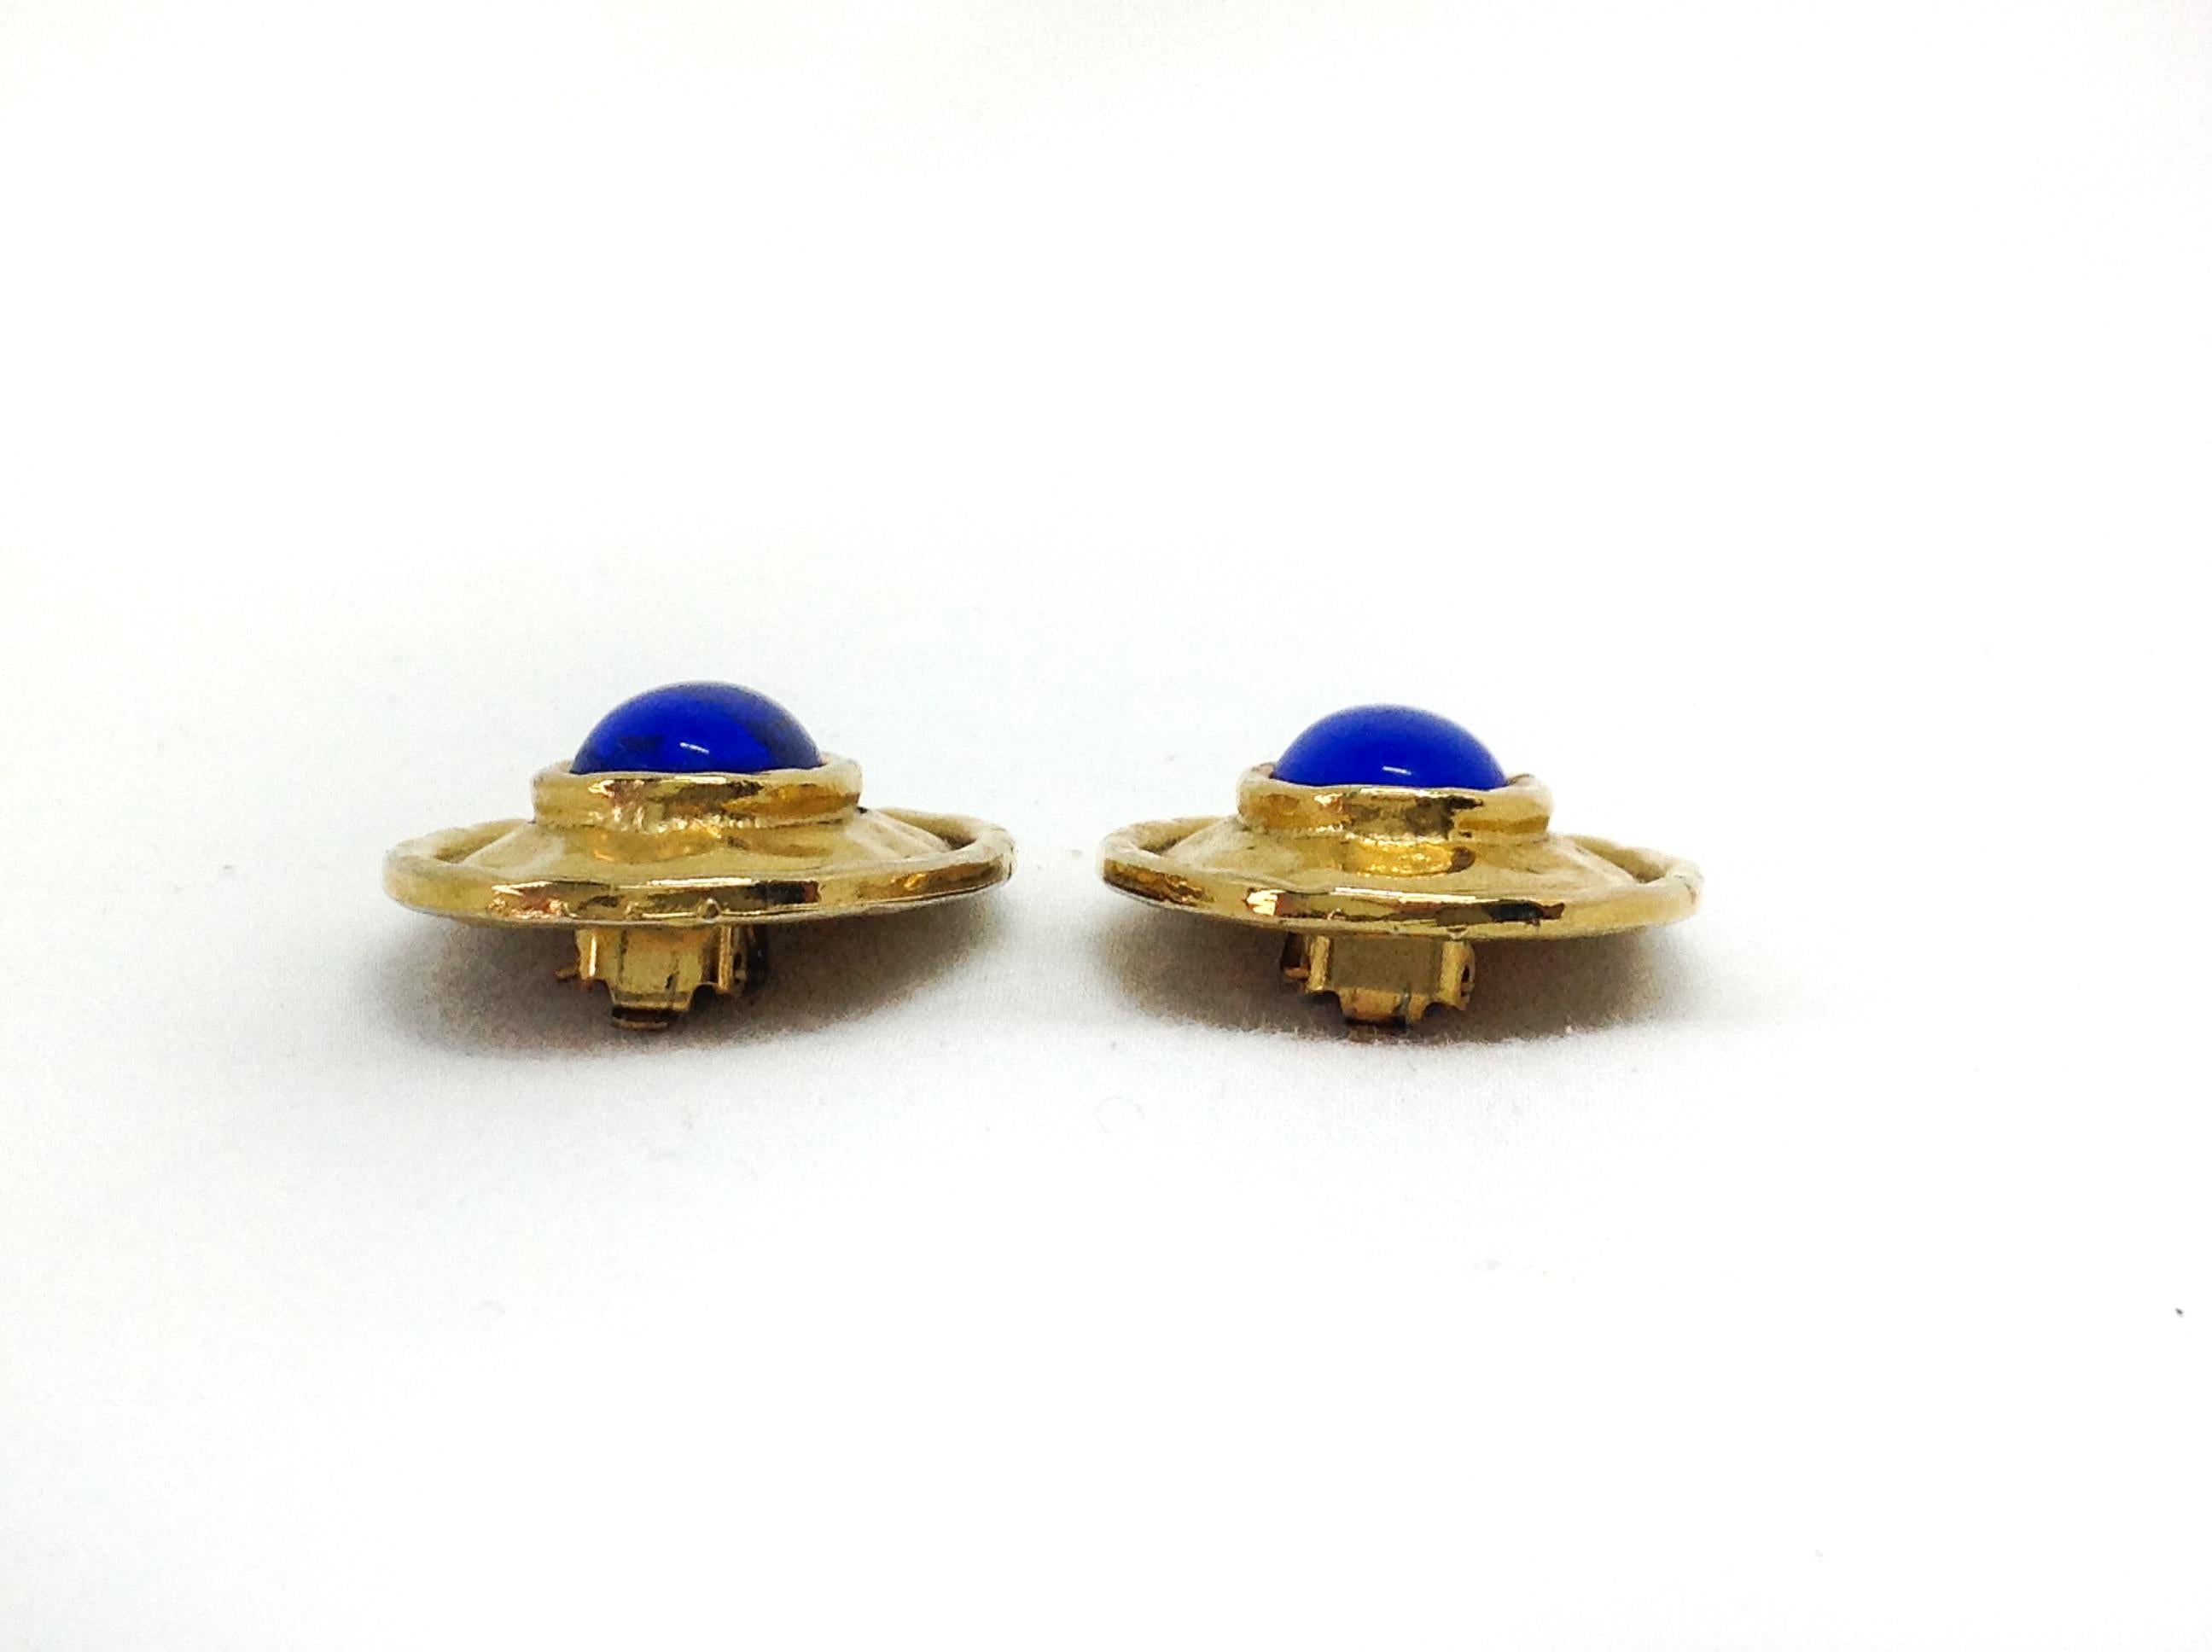 Edouard Rambaud 1980s Vintage Clip On Earrings

Amazing 1980s statement earrings from the very collectable costume jewellery designer Edouard Rambaud. With the 80s making a huge comeback, these will give cool vintage vibes to your wardrobe all year